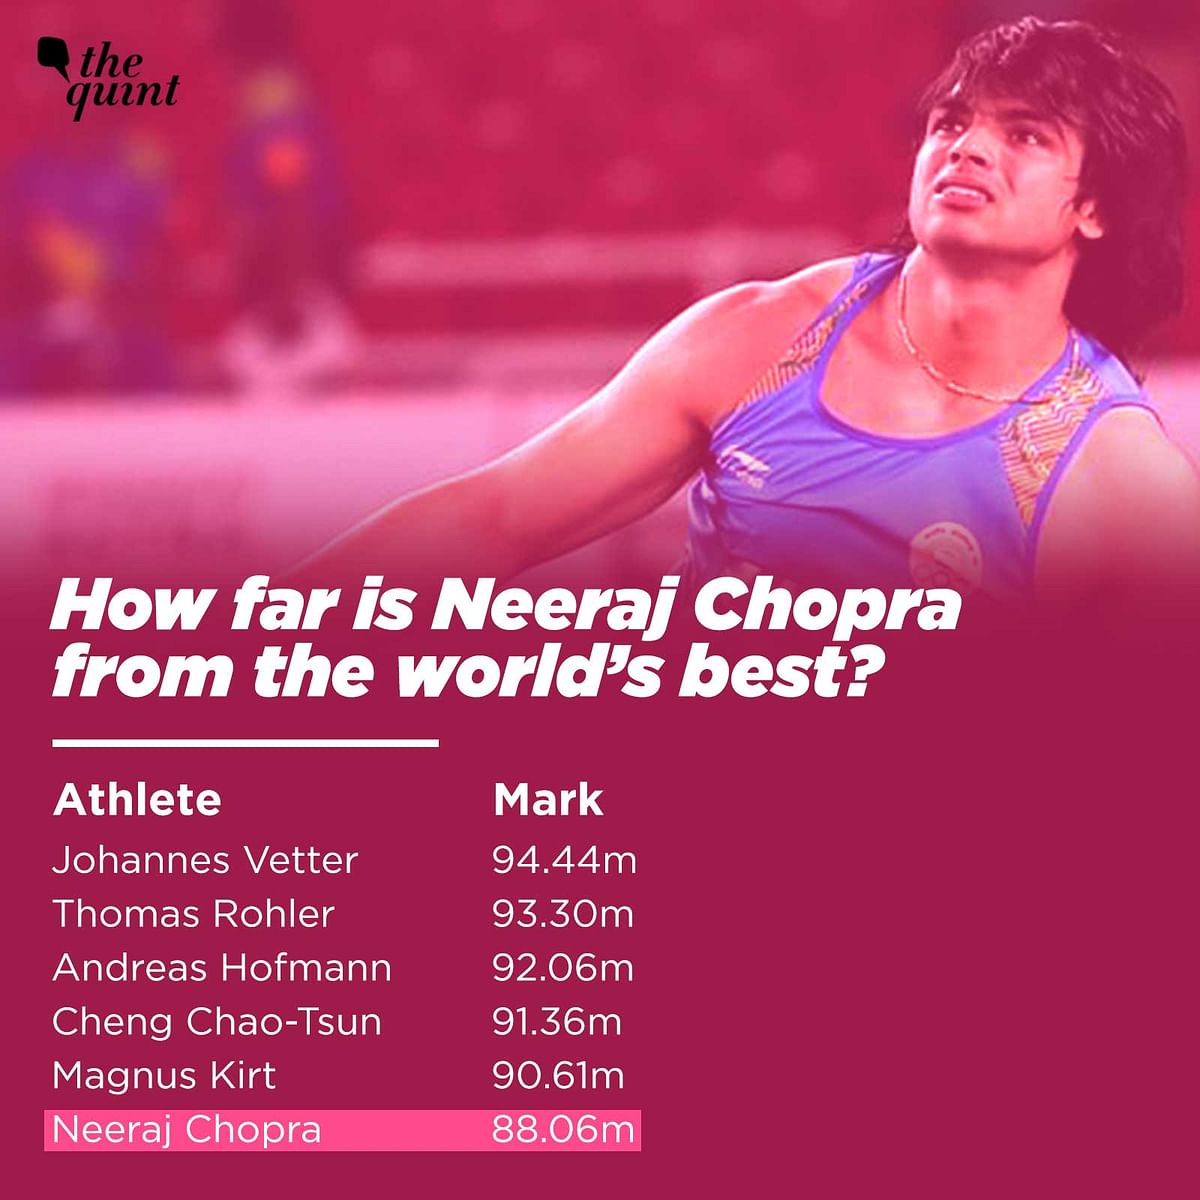 Neeraj Chopra’s personal best of 88.06m would have earned him a bronze medal at the Rio Olympic Games in 2016.